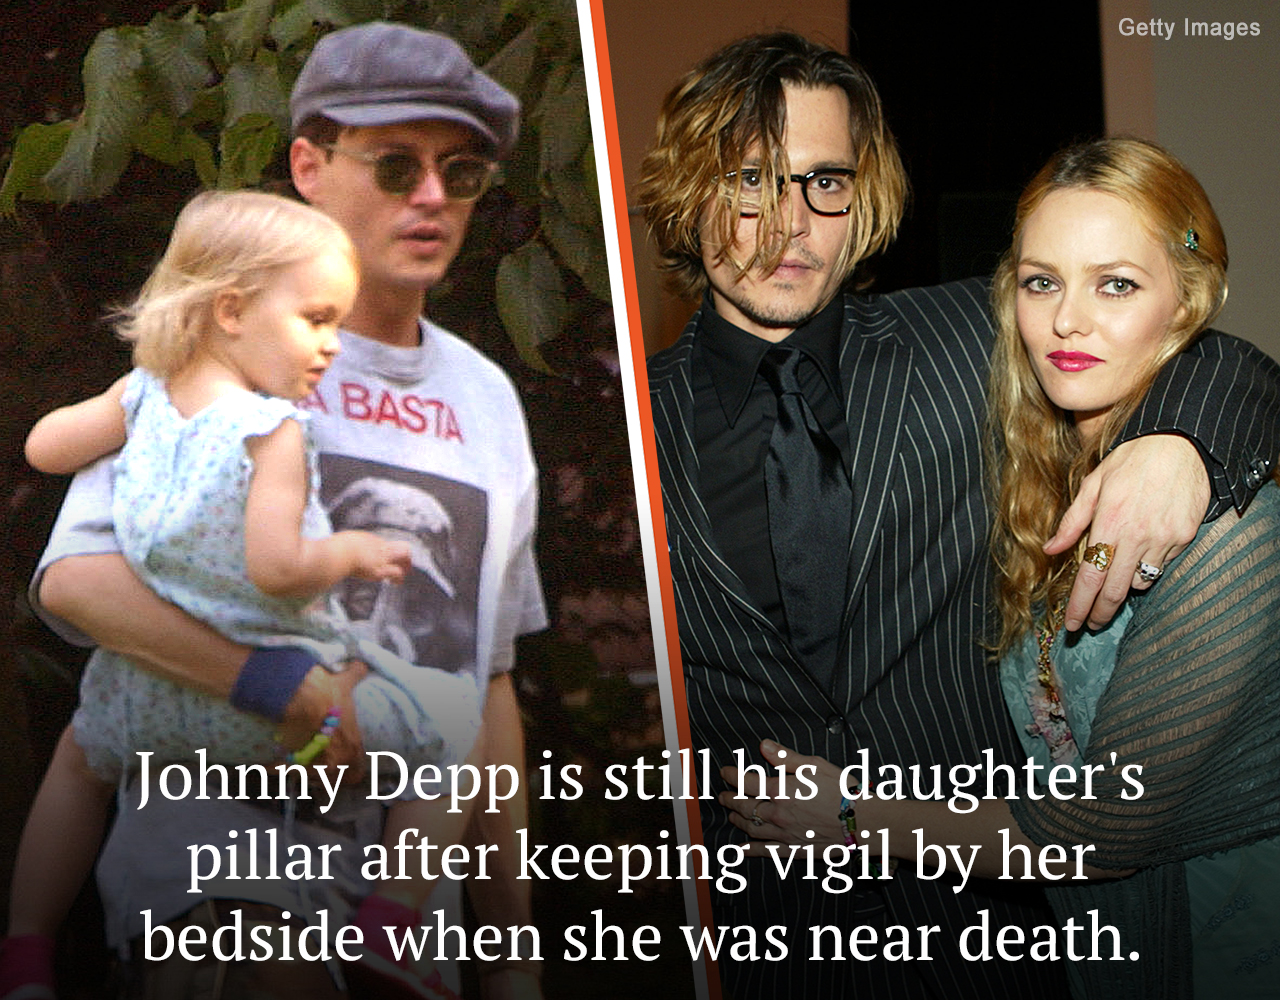 Johnny Depp cut down on his smoking and drinking habits after he met Vanessa Paradis, the woman who would become the mother of his two kids